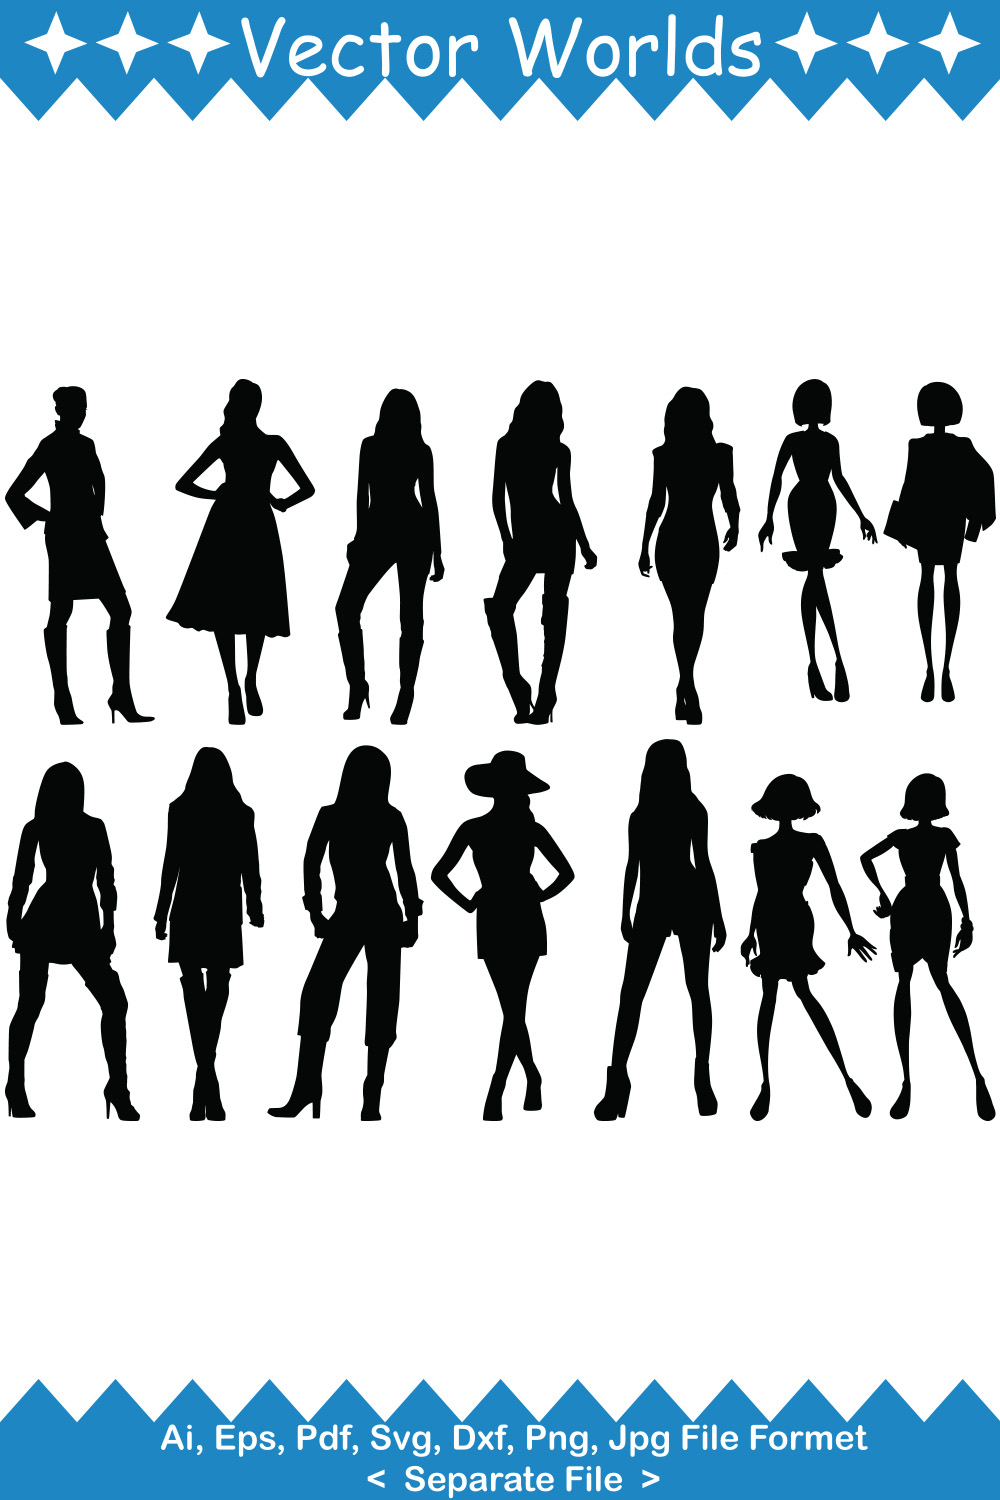 Bundle of vector gorgeous images of fashionable women silhouettes.